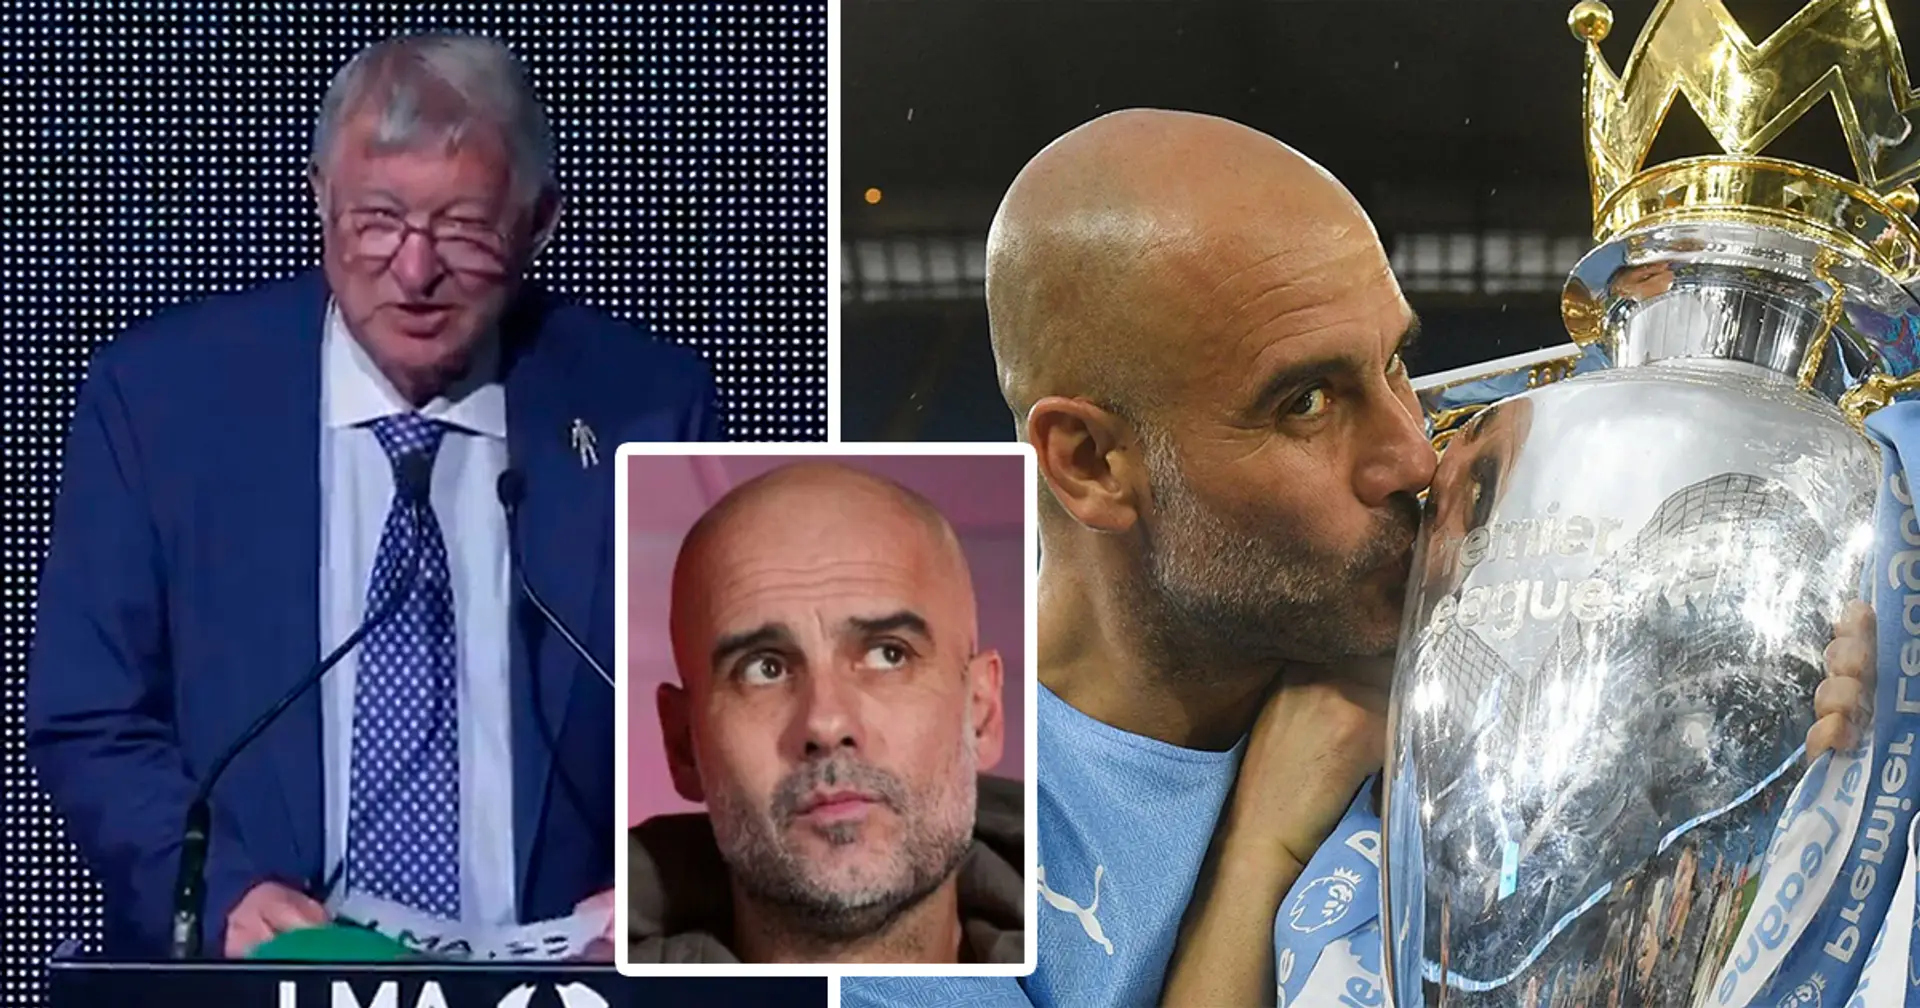 Sir Alex Ferguson makes his feelings clear after presenting Pep Guardiola another award